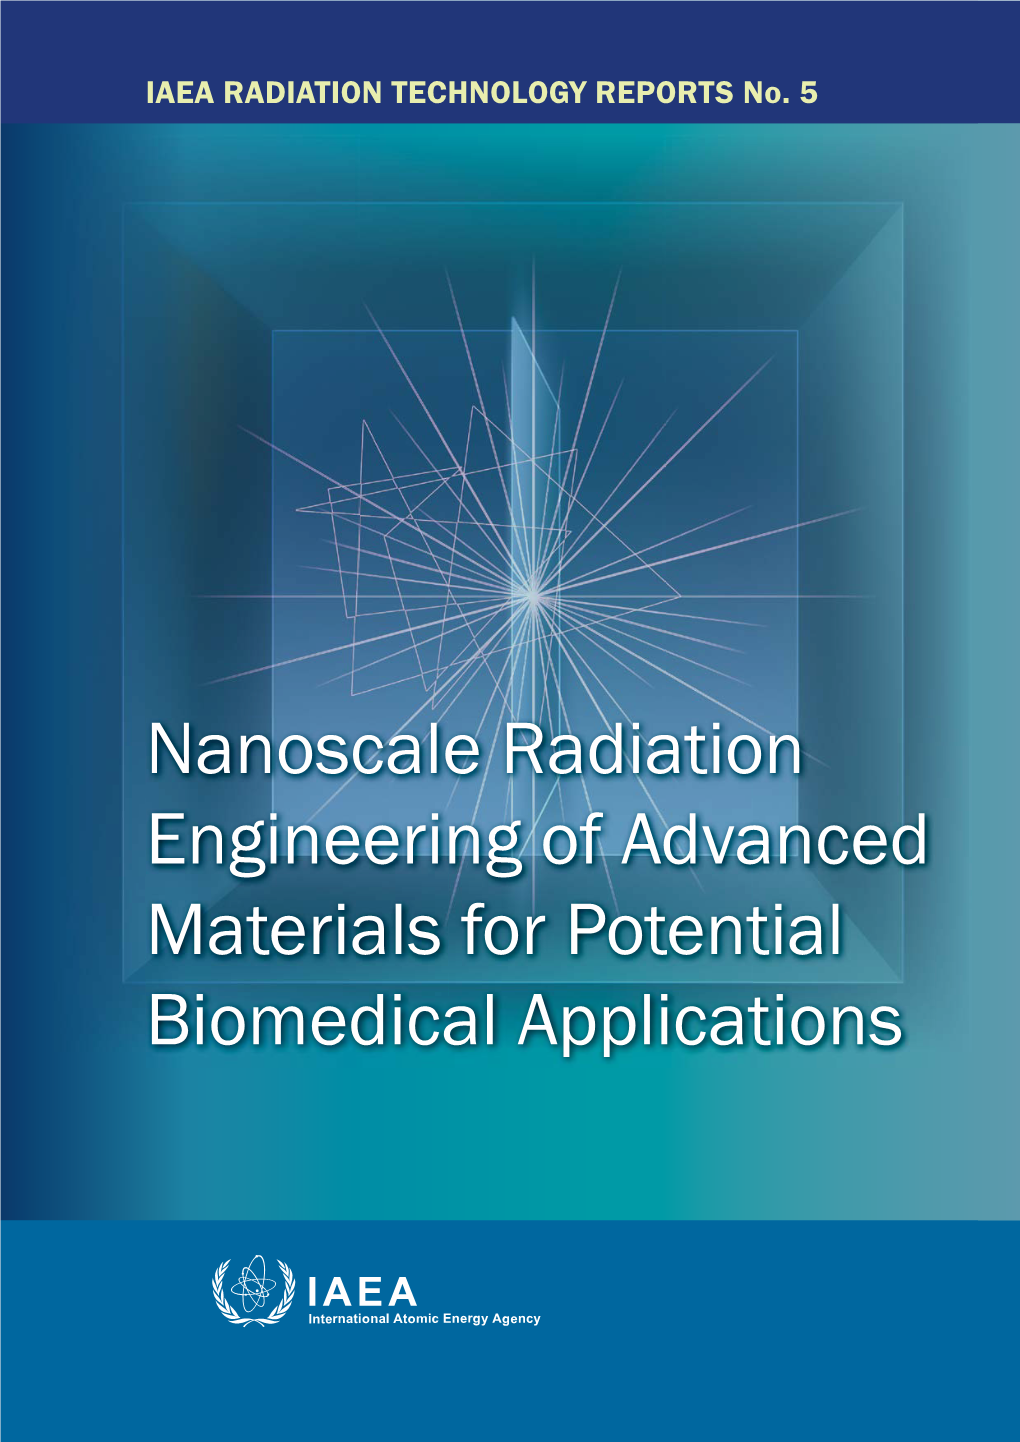 Nanoscale Radiation Engineering of Advanced Materials for Potential